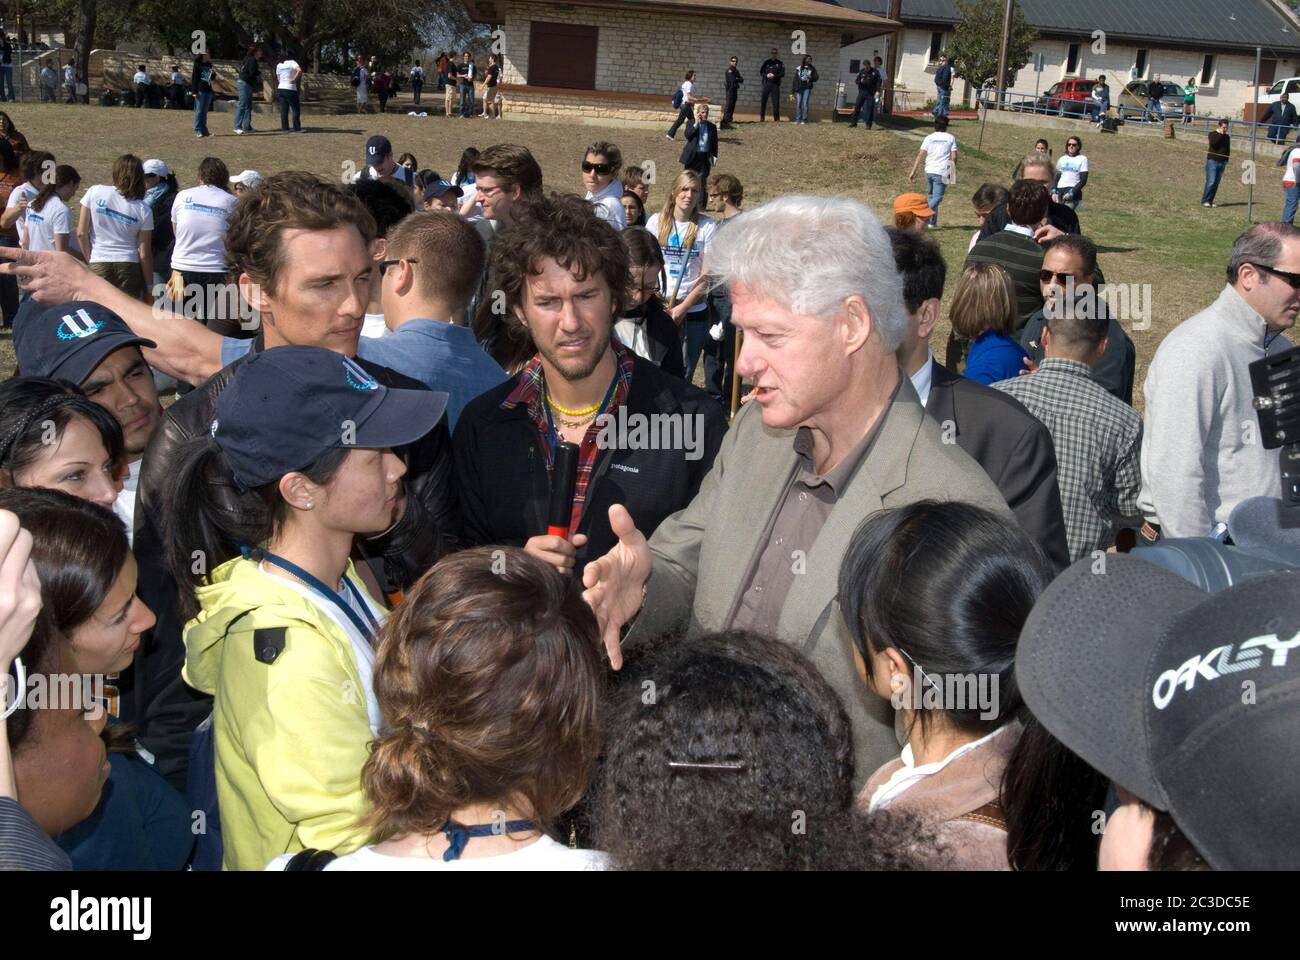 Austin, Texas USA, February 15, 2009: College students gather around former President Bill Clinton (center) and actor Matthew McConaughey at Rosewood Park in East Austin. The student volunteers were working on maintenance projects at the park as part of the Clinton Global Initiative's community service component. ©Marjorie Kamys Cotera/Daemmrich Photography Stock Photo